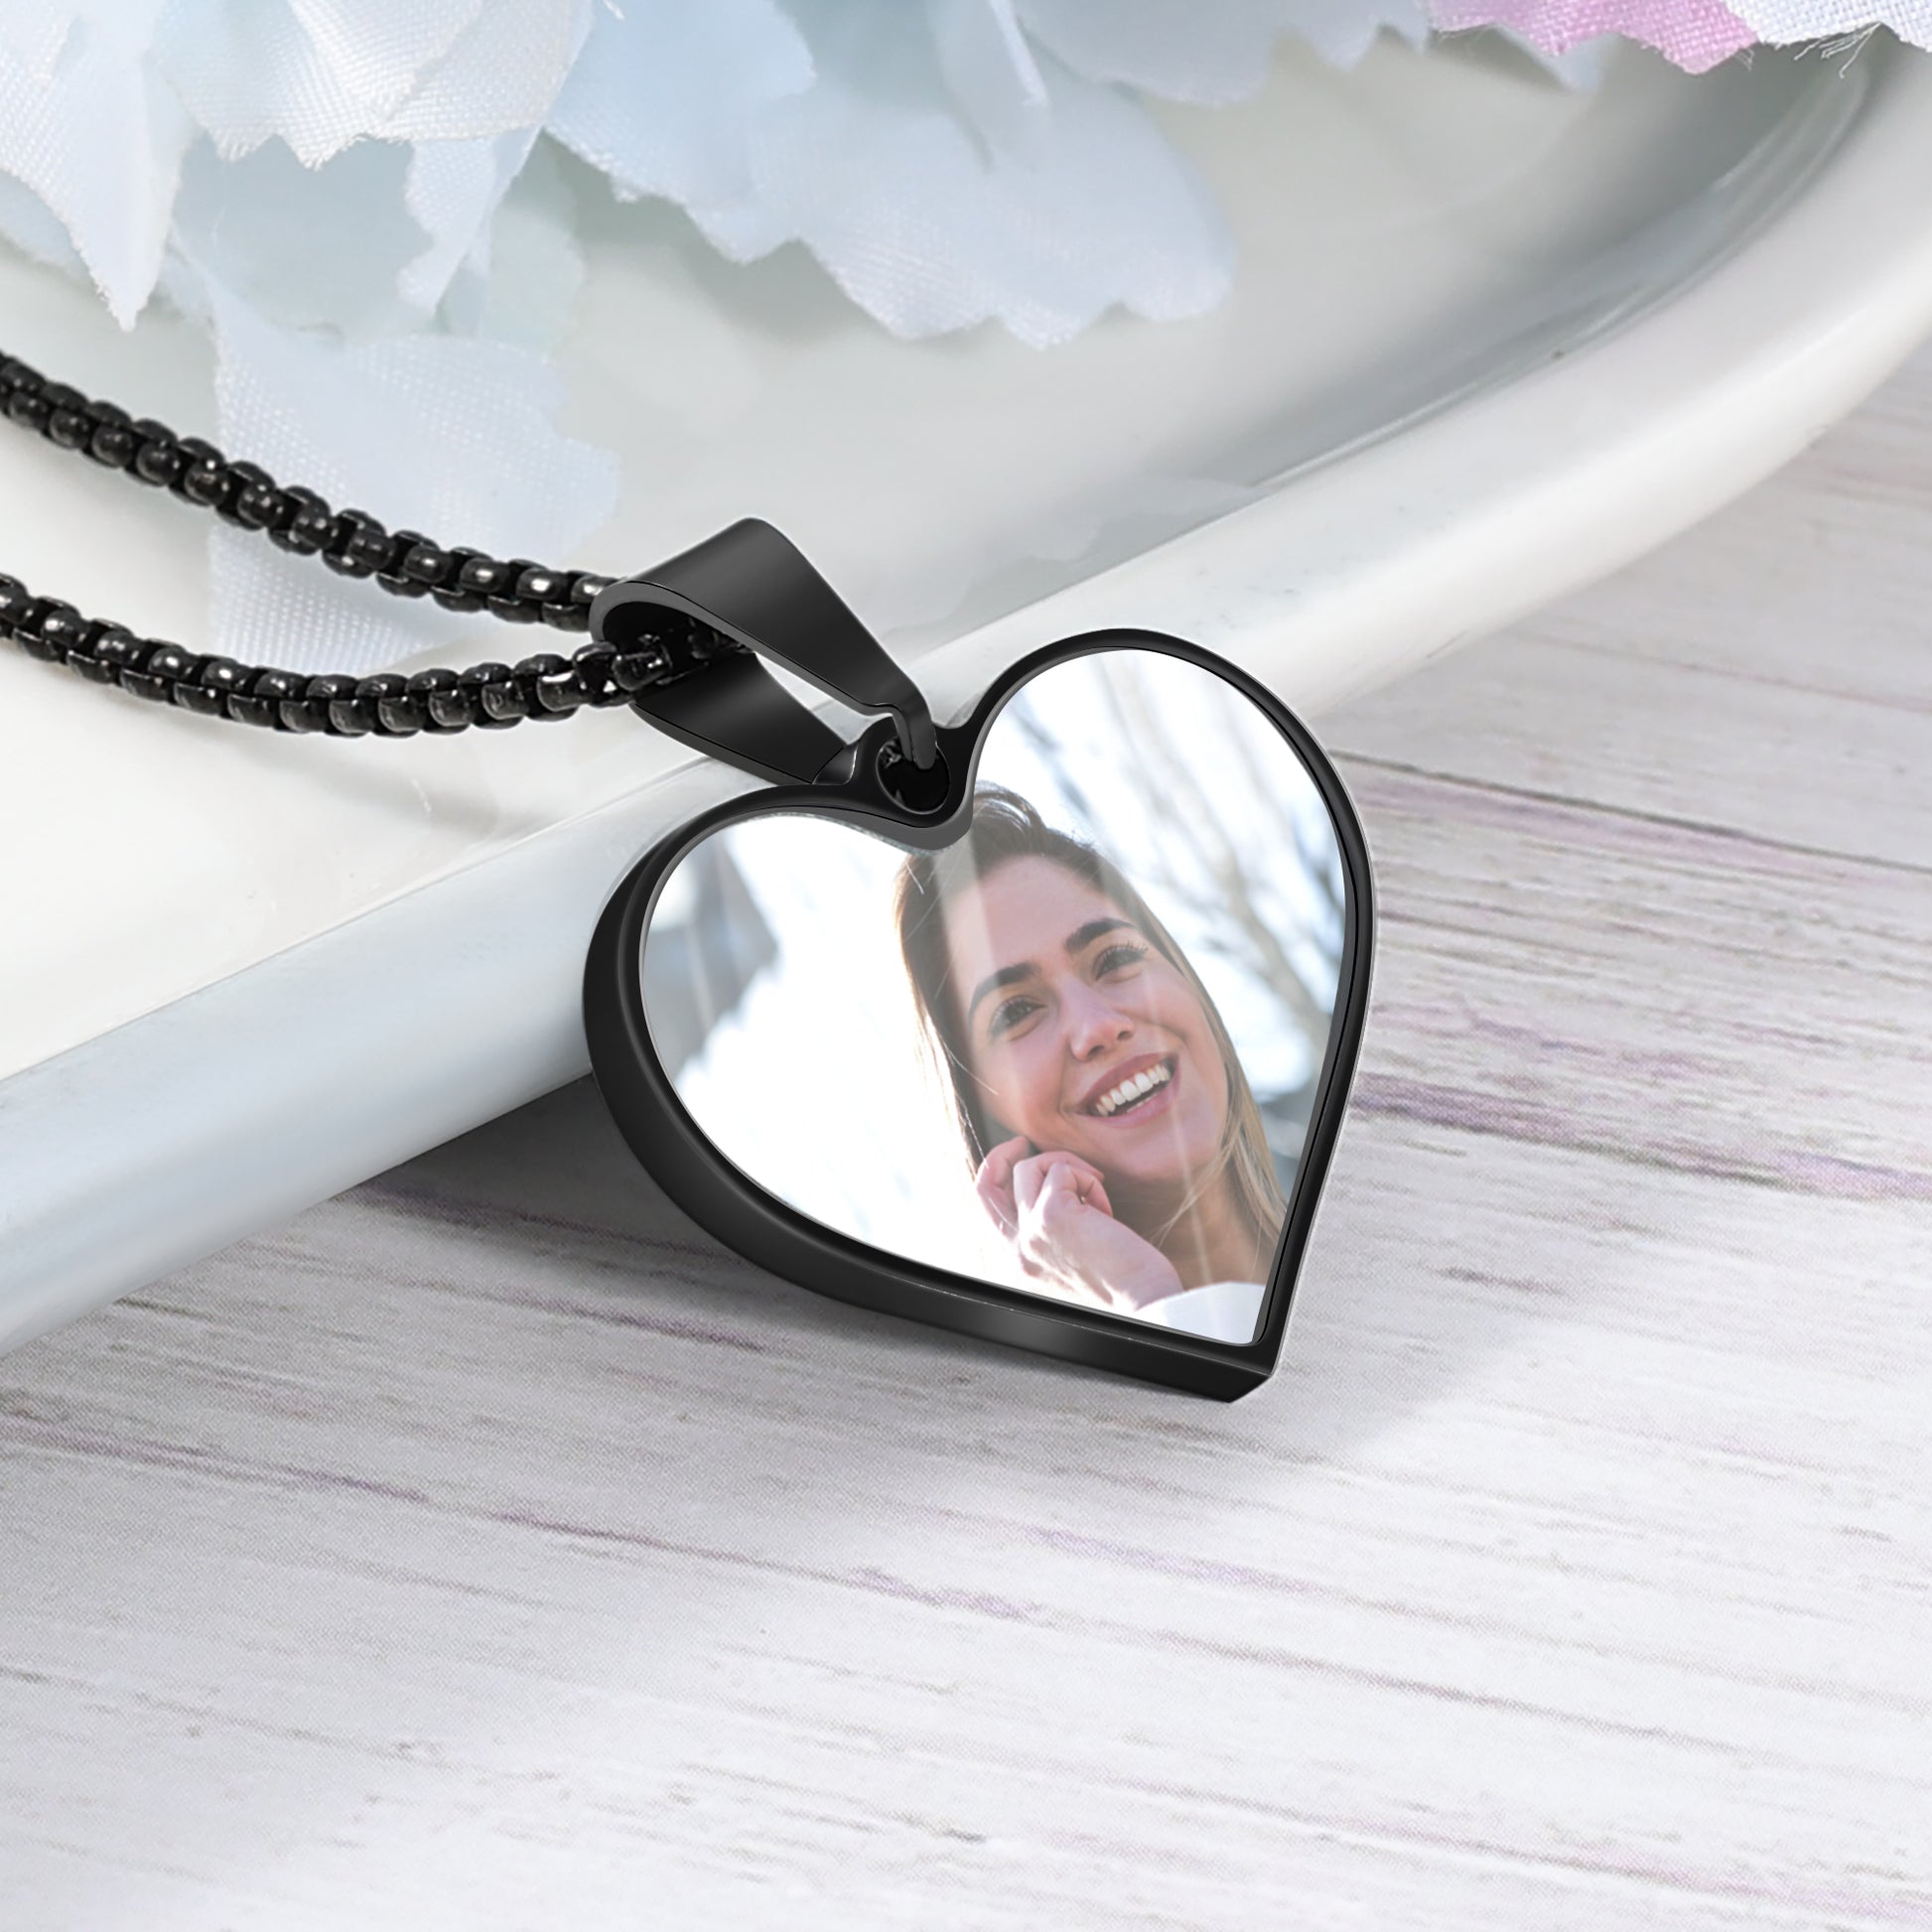 necklaces with a picture inside